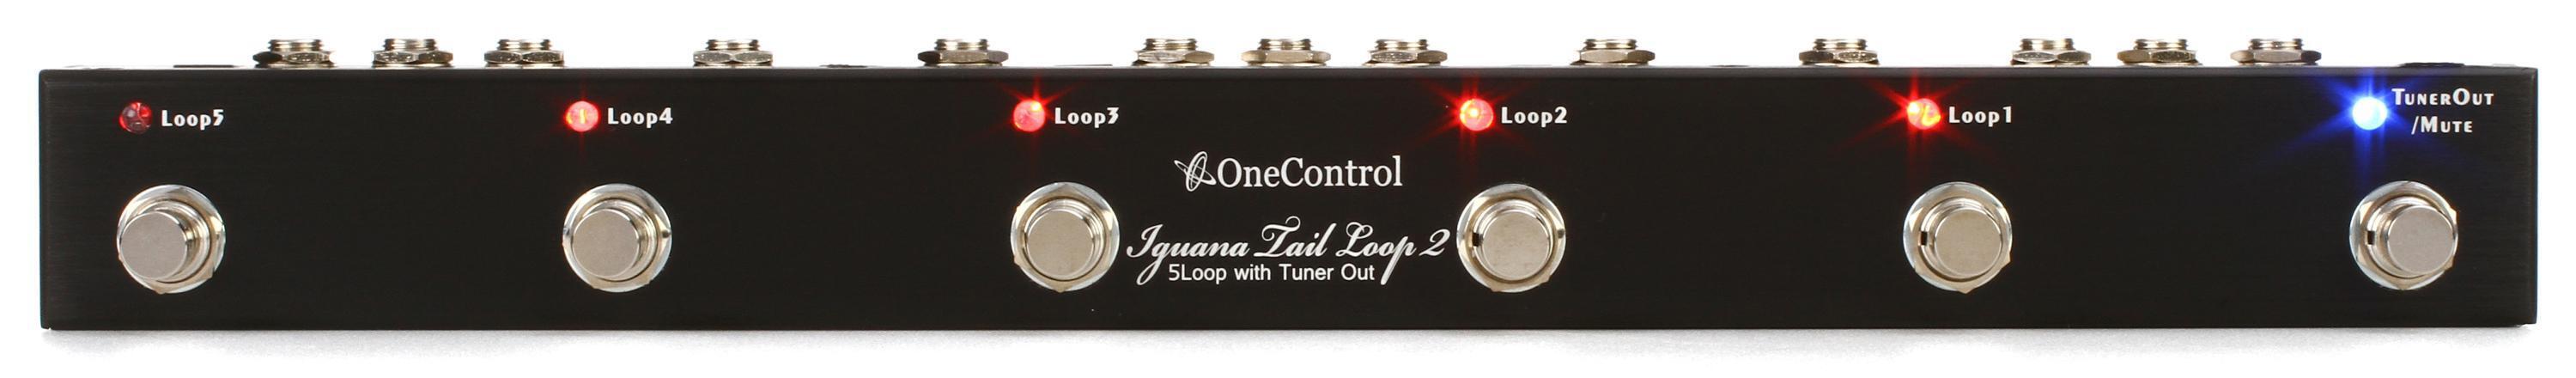 One Control Iguana Tail Loop MKII 5-channel Loop Switching Pedal